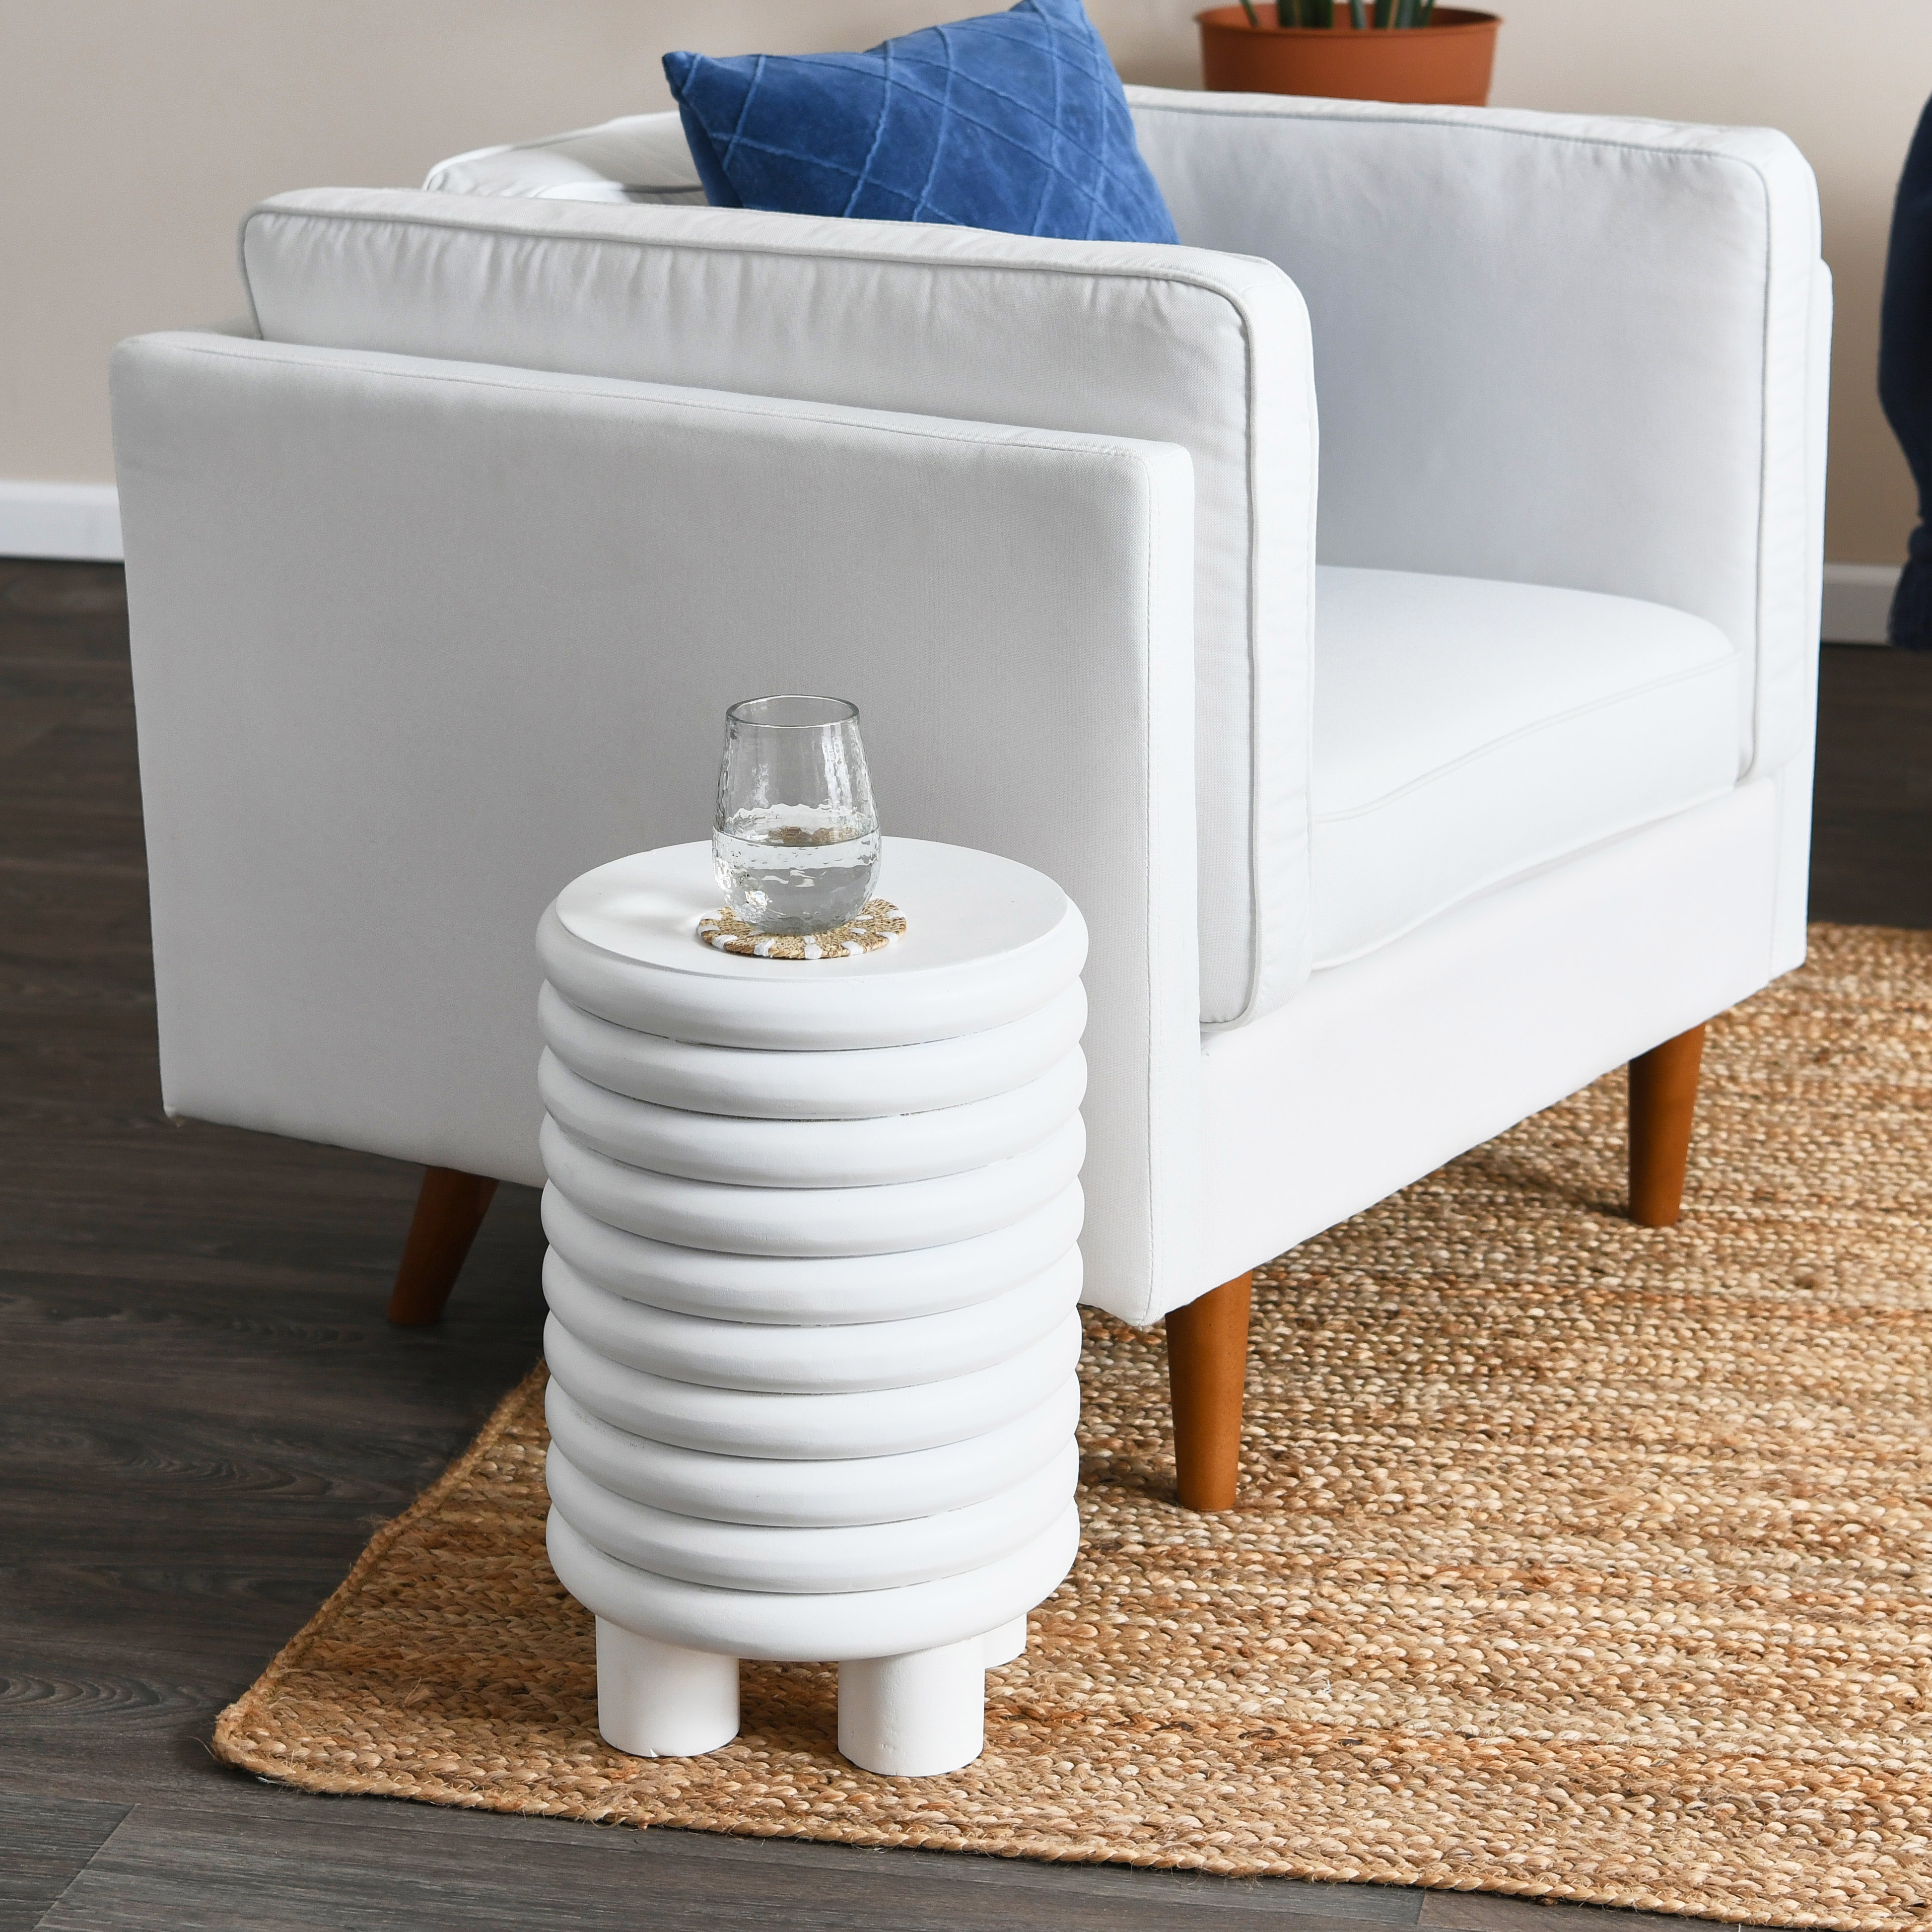 Dossier Vintage-Inspired Solid Wood End Table with Flat top for use as End Table or Stool, White Finish - Image 5